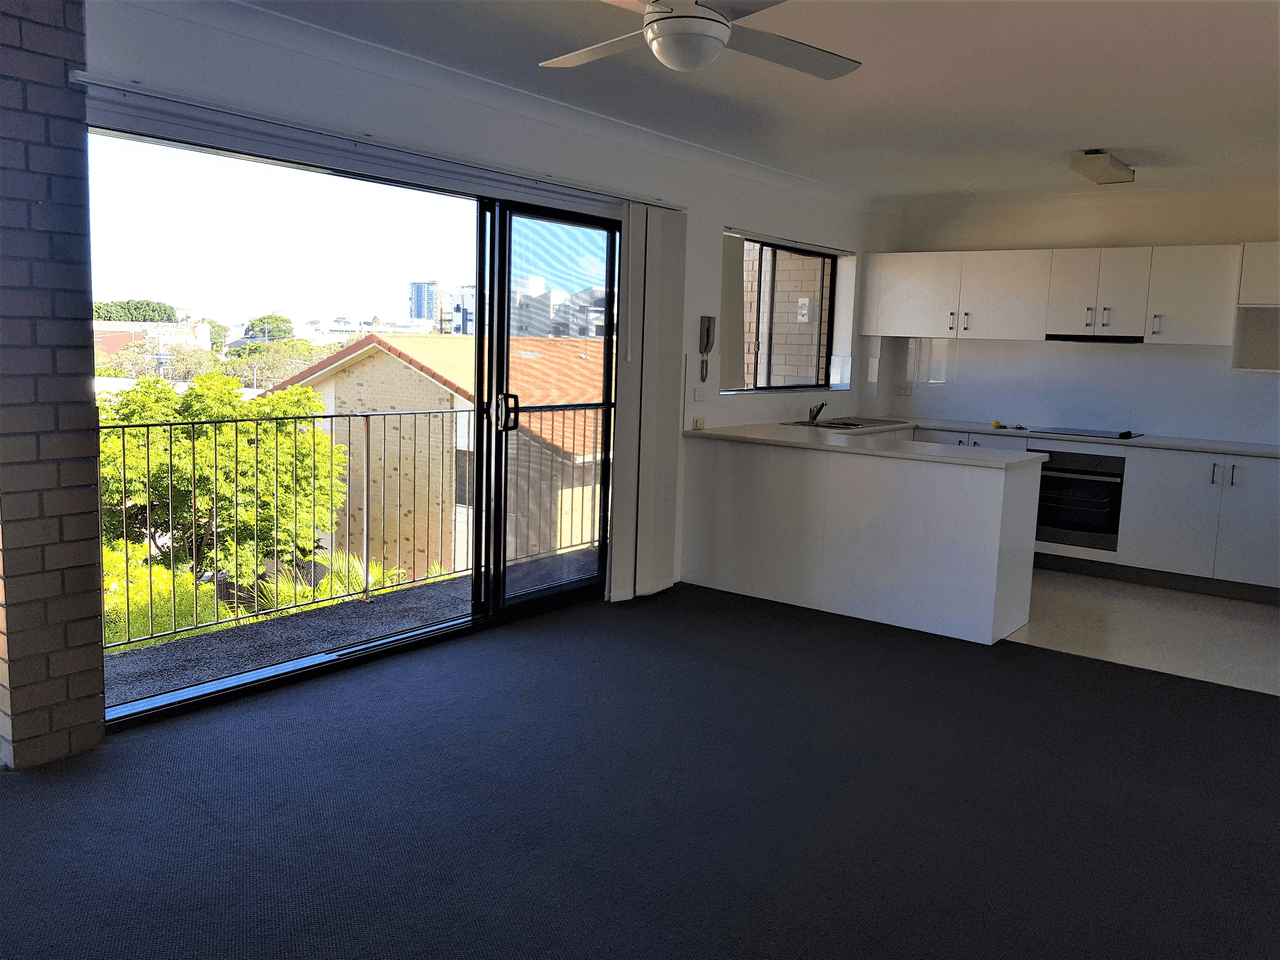 6/17 Downs Street, REDCLIFFE, QLD 4020